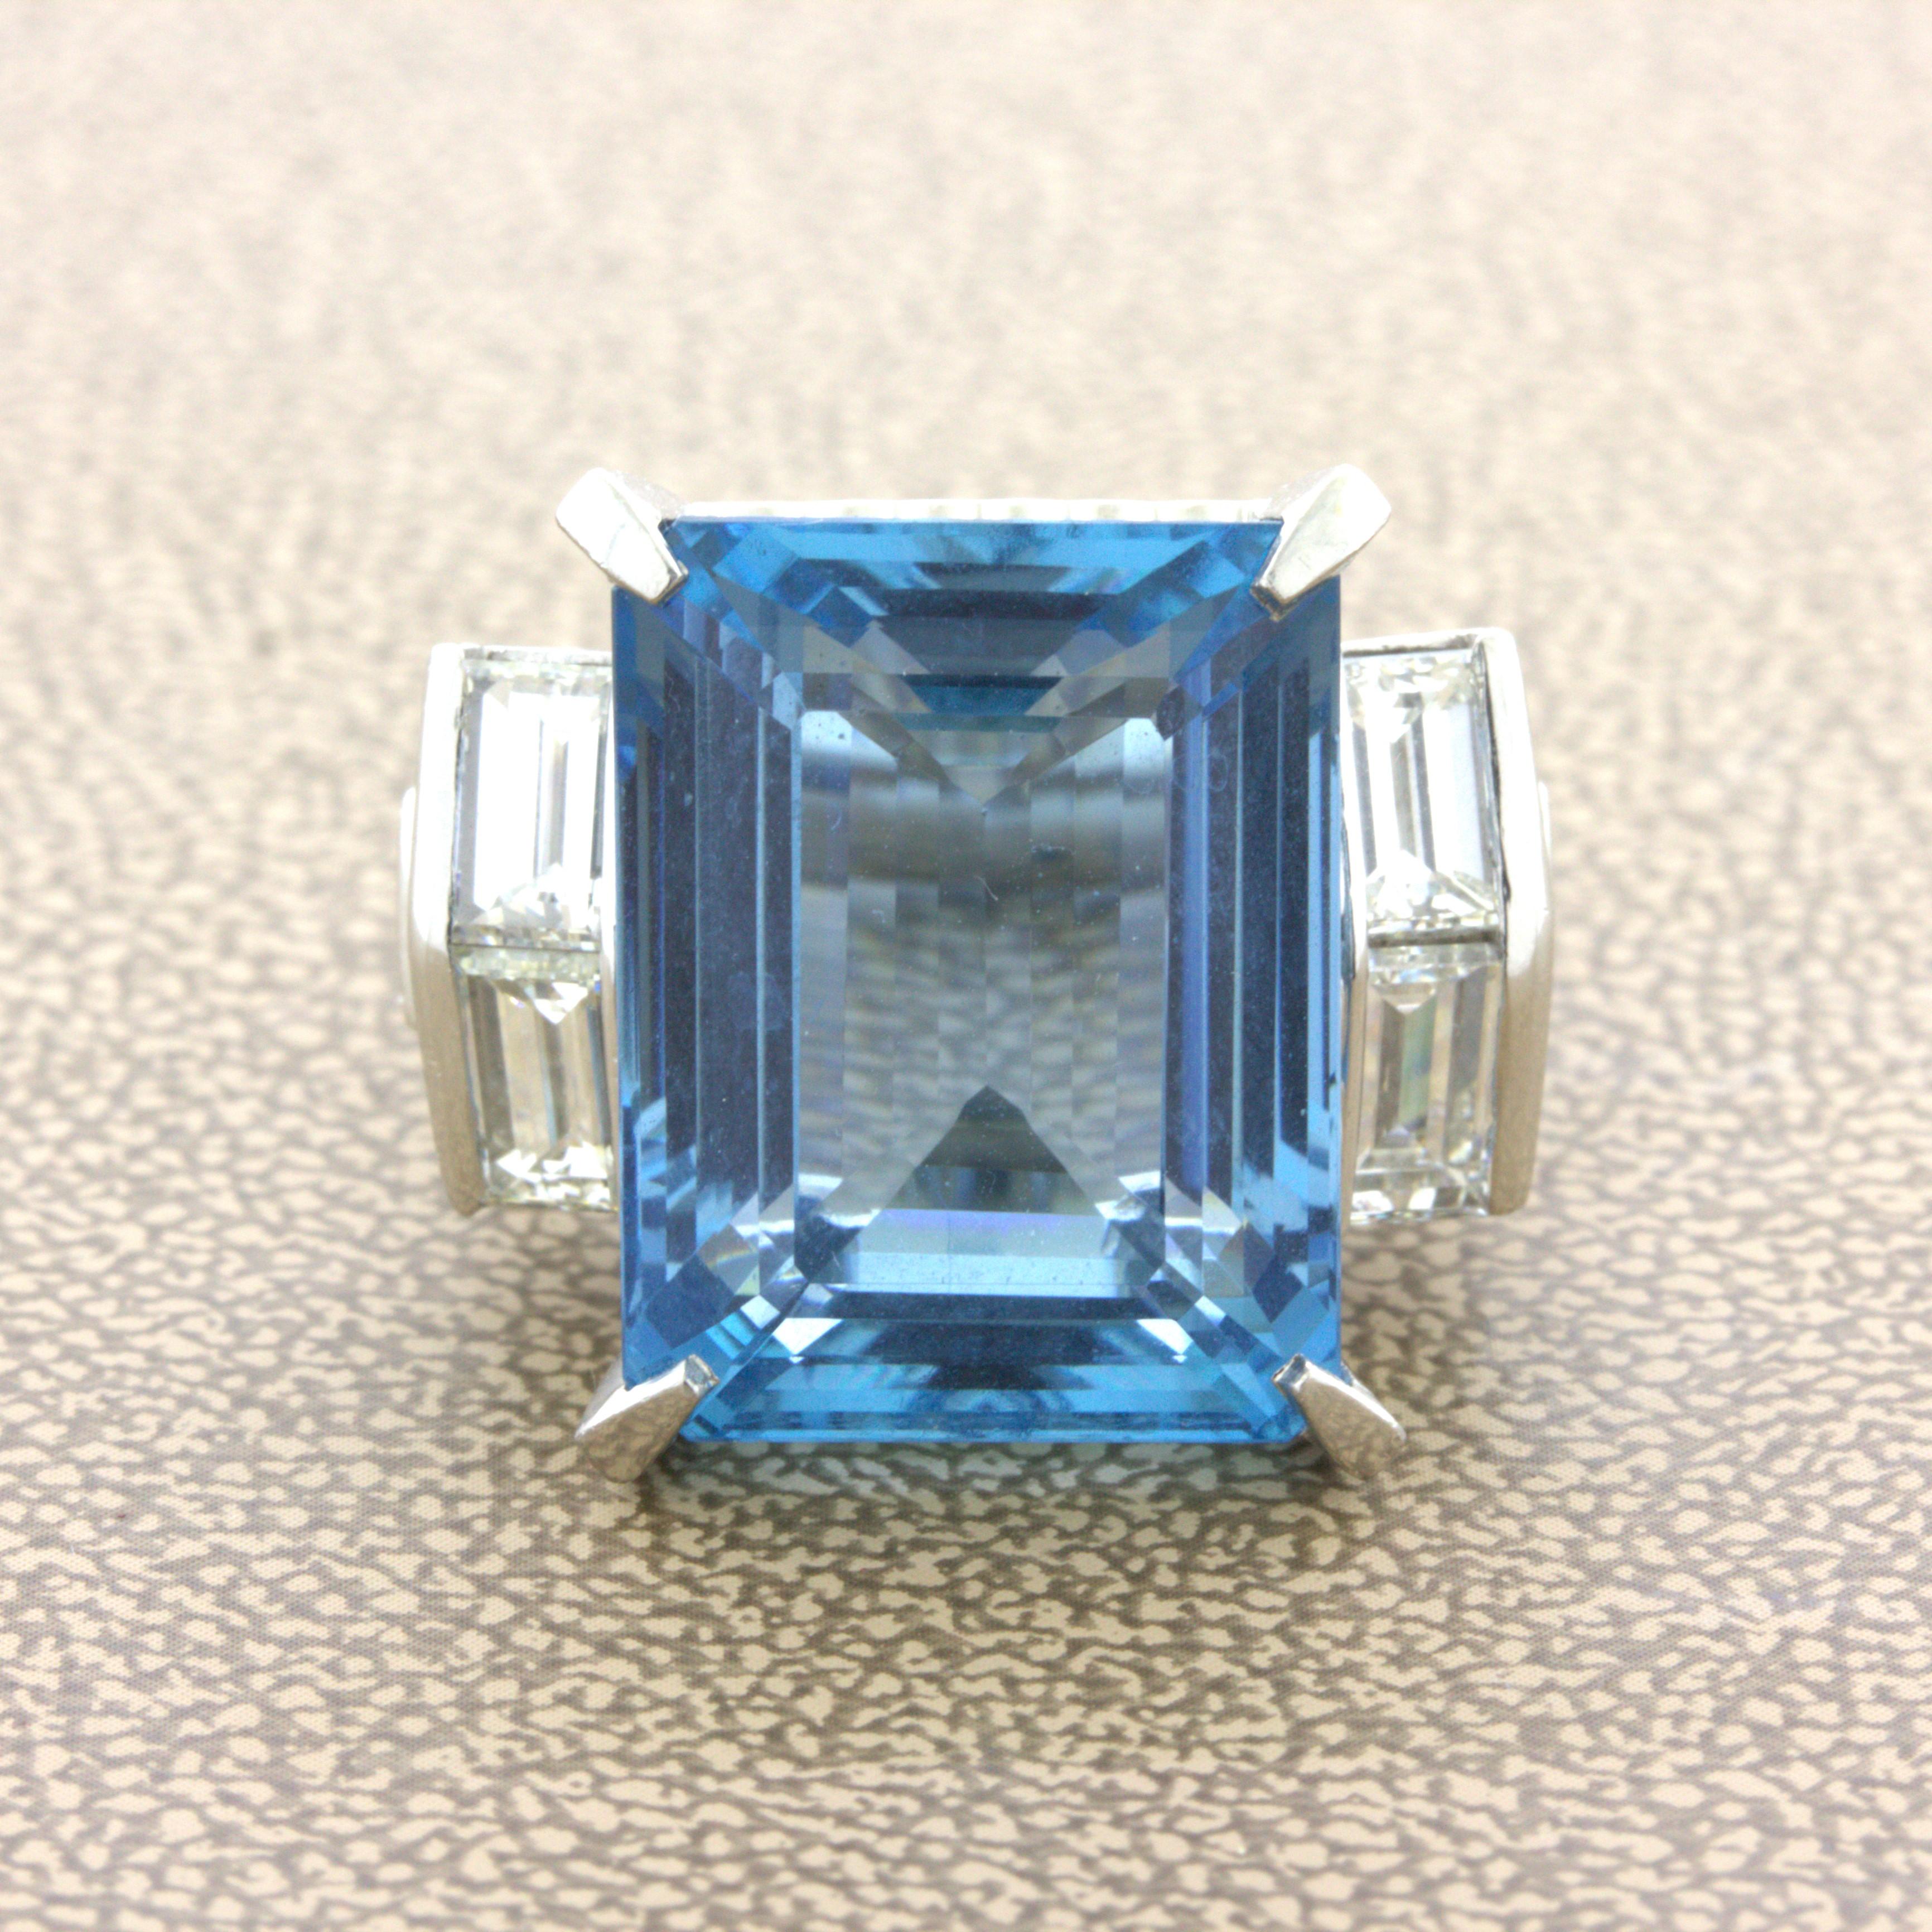 A chic and elegant platinum cocktail ring featuring a very fine quality aquamarine. It weighs an impressive 19.11 carats and has top gem quality sea-blue color, known in the trade as “Santa Maria” type for the finest of colored aquamarine. It is